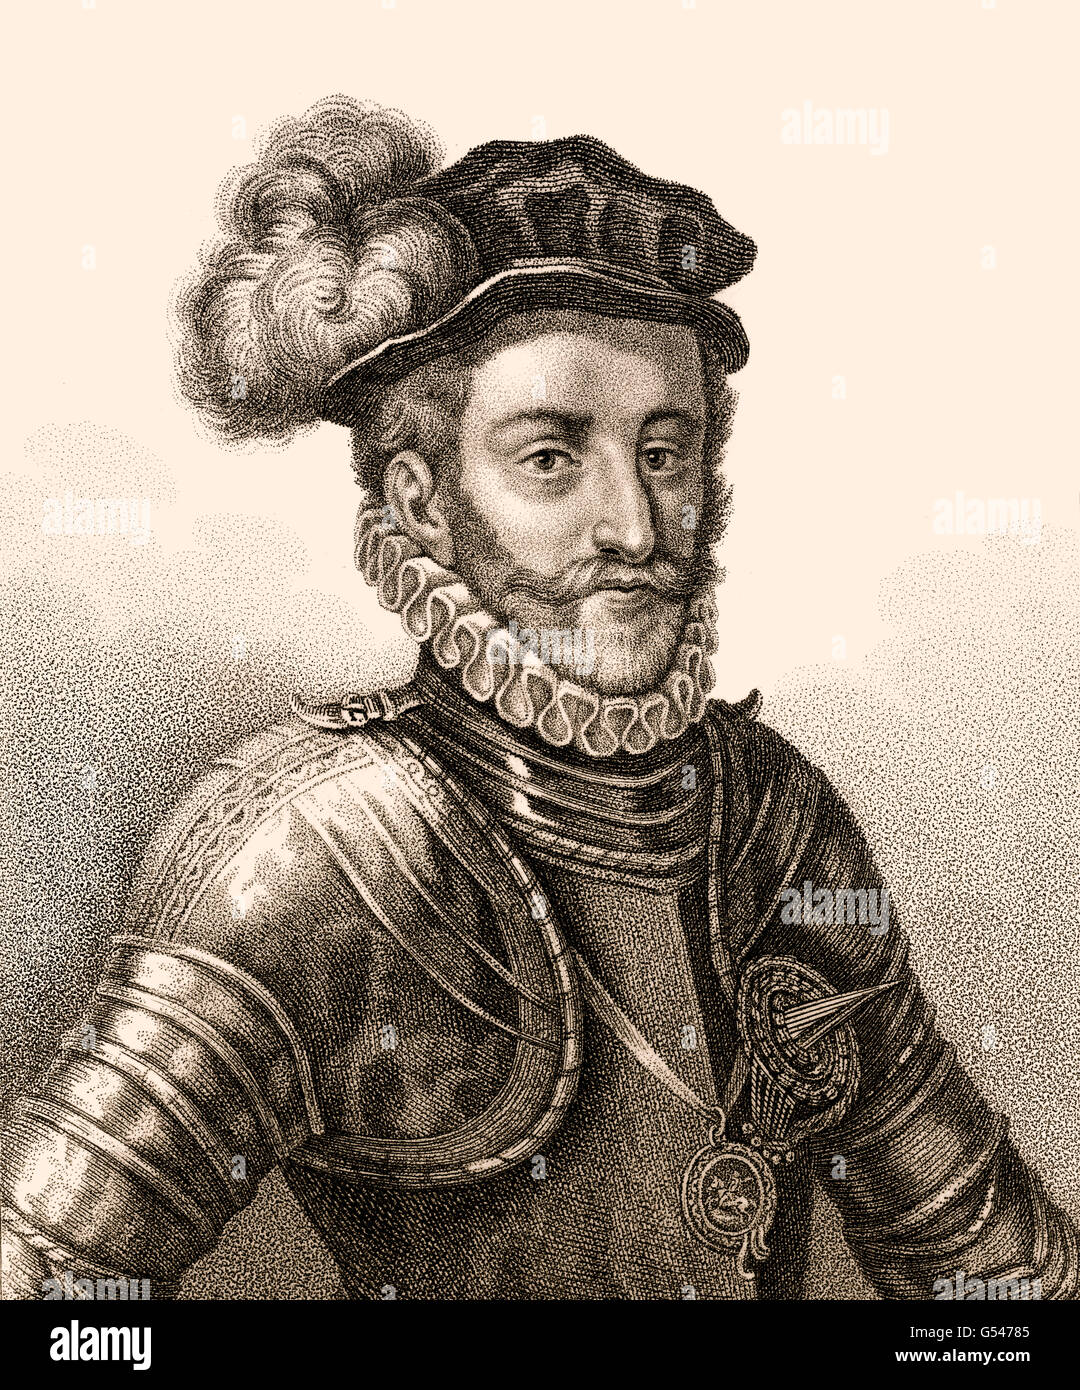 walter-devereux-1st-earl-of-essex-1541-1576-an-english-nobleman-and-G54785.jpg